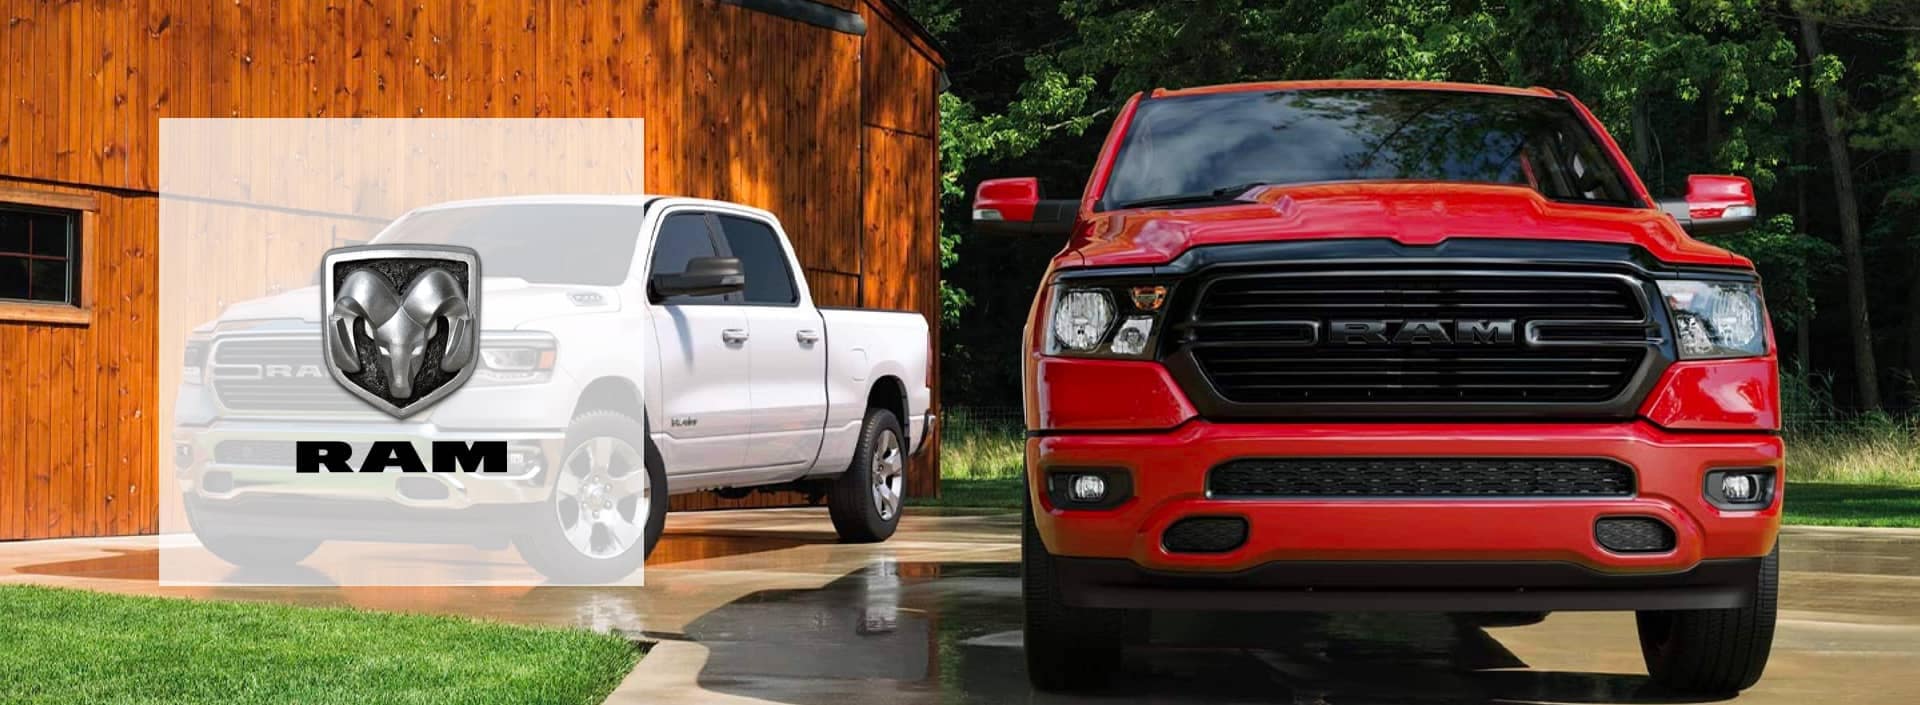 Front view of White Ram Truck and Red Ram Truck parked in driveway